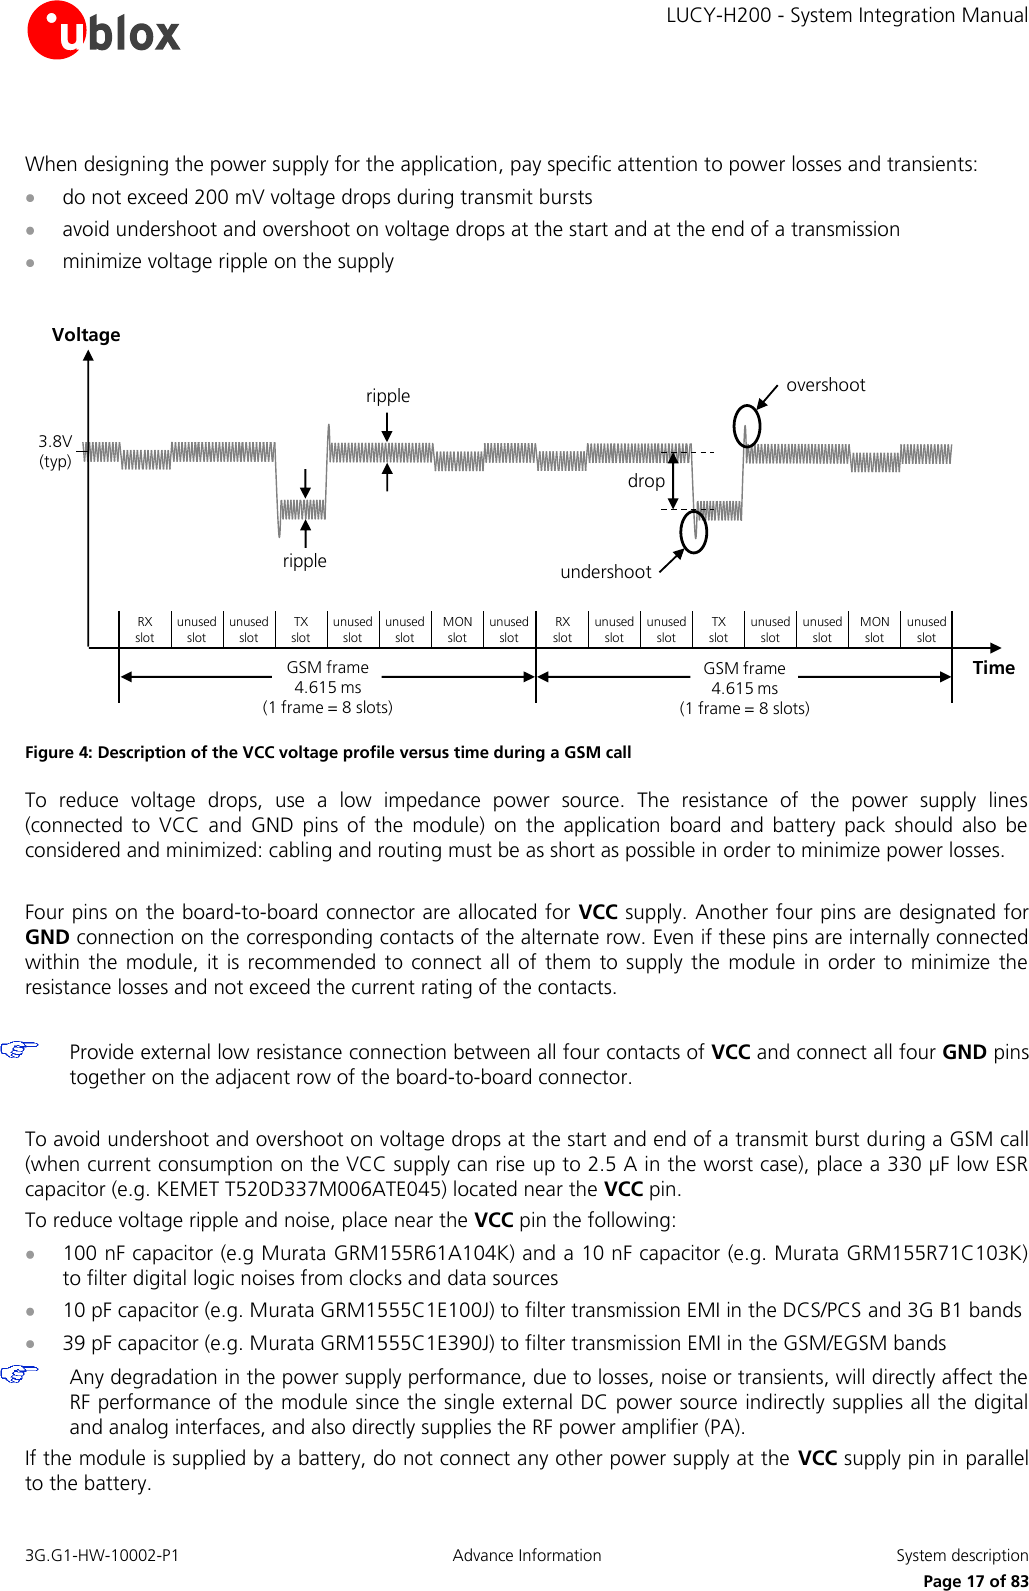     LUCY-H200 - System Integration Manual 3G.G1-HW-10002-P1  Advance Information  System description      Page 17 of 83  When designing the power supply for the application, pay specific attention to power losses and transients:   do not exceed 200 mV voltage drops during transmit bursts   avoid undershoot and overshoot on voltage drops at the start and at the end of a transmission  minimize voltage ripple on the supply  TimeundershootovershootripplerippledropVoltage3.8V (typ)RX     slotunused slotunused slotTX     slotunused slotunused slotMON       slotunused slotRX     slotunused slotunused slotTX     slotunused slotunused slotMON   slotunused slotGSM frame             4.615 ms                                       (1 frame = 8 slots)GSM frame             4.615 ms                                       (1 frame = 8 slots) Figure 4: Description of the VCC voltage profile versus time during a GSM call To  reduce  voltage  drops,  use  a  low  impedance  power  source.  The  resistance  of  the  power  supply  lines (connected  to  VCC  and  GND  pins  of  the  module)  on  the  application  board  and  battery  pack  should  also  be considered and minimized: cabling and routing must be as short as possible in order to minimize power losses.  Four pins on the board-to-board connector are allocated for VCC supply. Another four pins are designated for GND connection on the corresponding contacts of the alternate row. Even if these pins are internally connected within the  module, it  is recommended to connect all  of them  to  supply the  module  in  order to  minimize the resistance losses and not exceed the current rating of the contacts.    Provide external low resistance connection between all four contacts of VCC and connect all four GND pins together on the adjacent row of the board-to-board connector.  To avoid undershoot and overshoot on voltage drops at the start and end of a transmit burst during a GSM call (when current consumption on the VCC supply can rise up to 2.5 A in the worst case), place a 330 µF low ESR capacitor (e.g. KEMET T520D337M006ATE045) located near the VCC pin. To reduce voltage ripple and noise, place near the VCC pin the following:  100 nF capacitor (e.g Murata GRM155R61A104K) and a 10 nF capacitor (e.g. Murata GRM155R71C103K) to filter digital logic noises from clocks and data sources  10 pF capacitor (e.g. Murata GRM1555C1E100J) to filter transmission EMI in the DCS/PCS and 3G B1 bands  39 pF capacitor (e.g. Murata GRM1555C1E390J) to filter transmission EMI in the GSM/EGSM bands   Any degradation in the power supply performance, due to losses, noise or transients, will directly affect the RF performance of the module since the single external DC power source indirectly supplies all the digital and analog interfaces, and also directly supplies the RF power amplifier (PA). If the module is supplied by a battery, do not connect any other power supply at the VCC supply pin in parallel to the battery. 